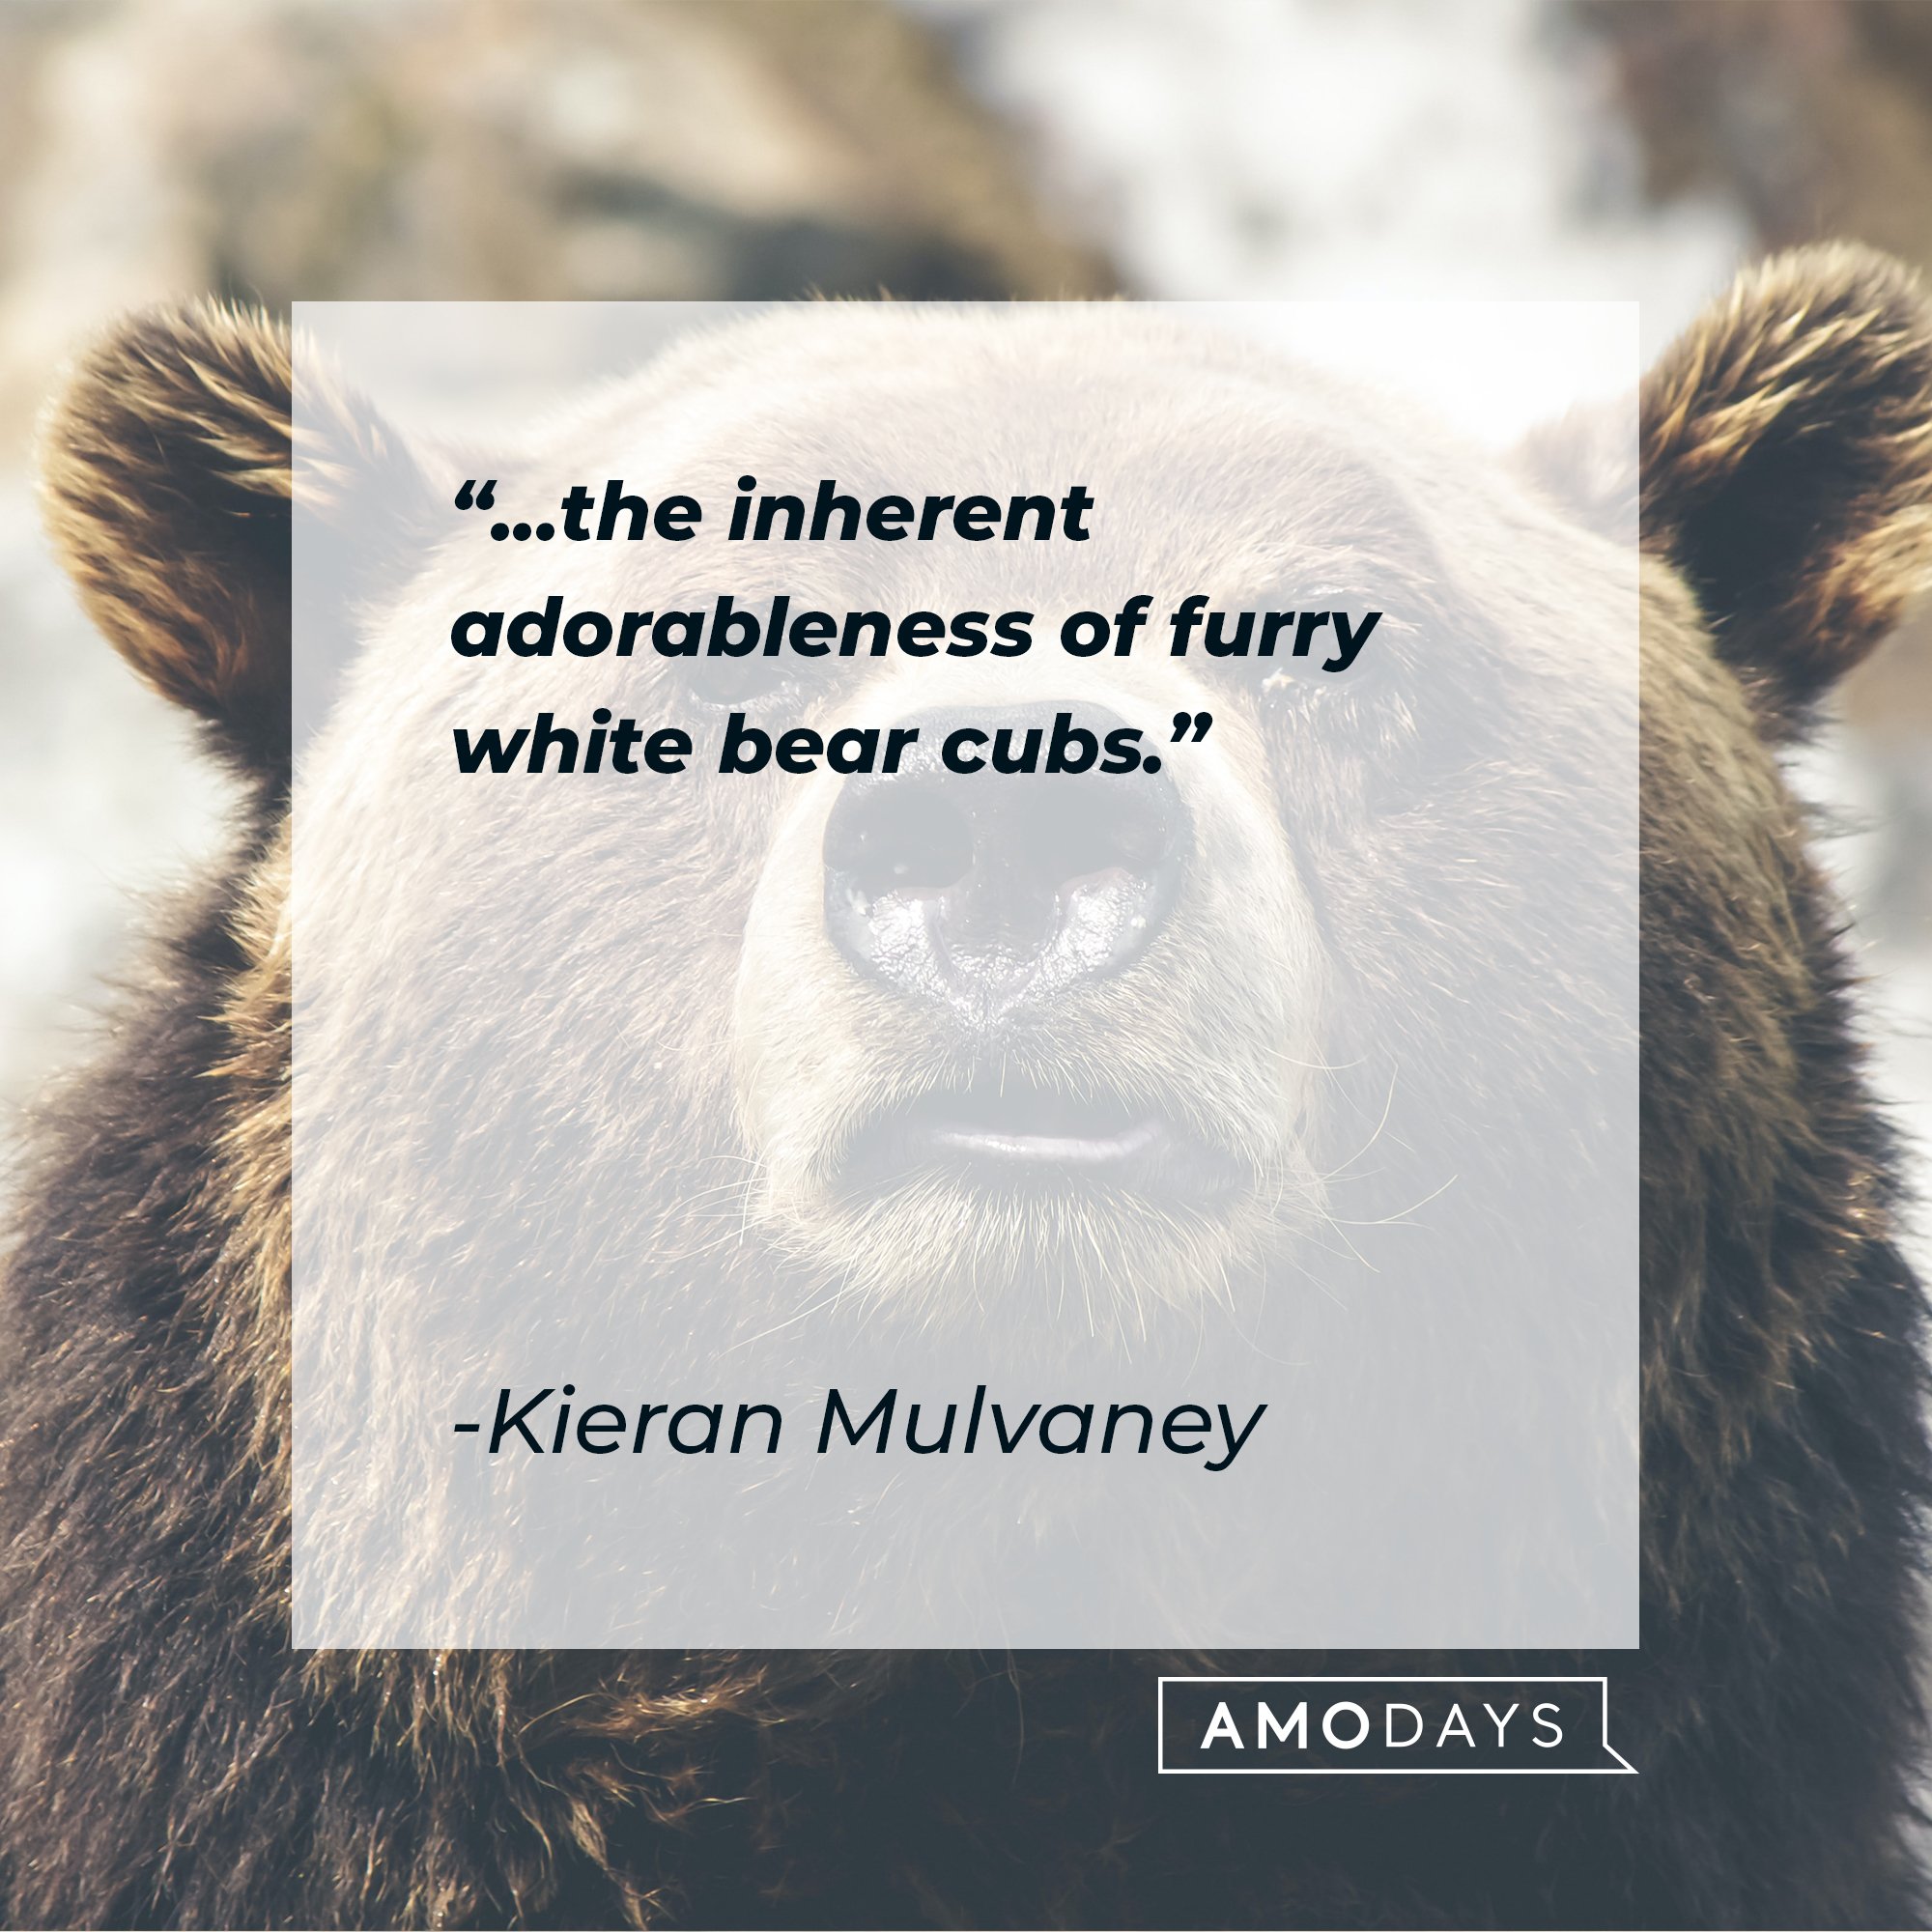 Kieran Mulvaney’s quote: "...the inherent adorableness of furry white bear cubs." | Image: AmoDays